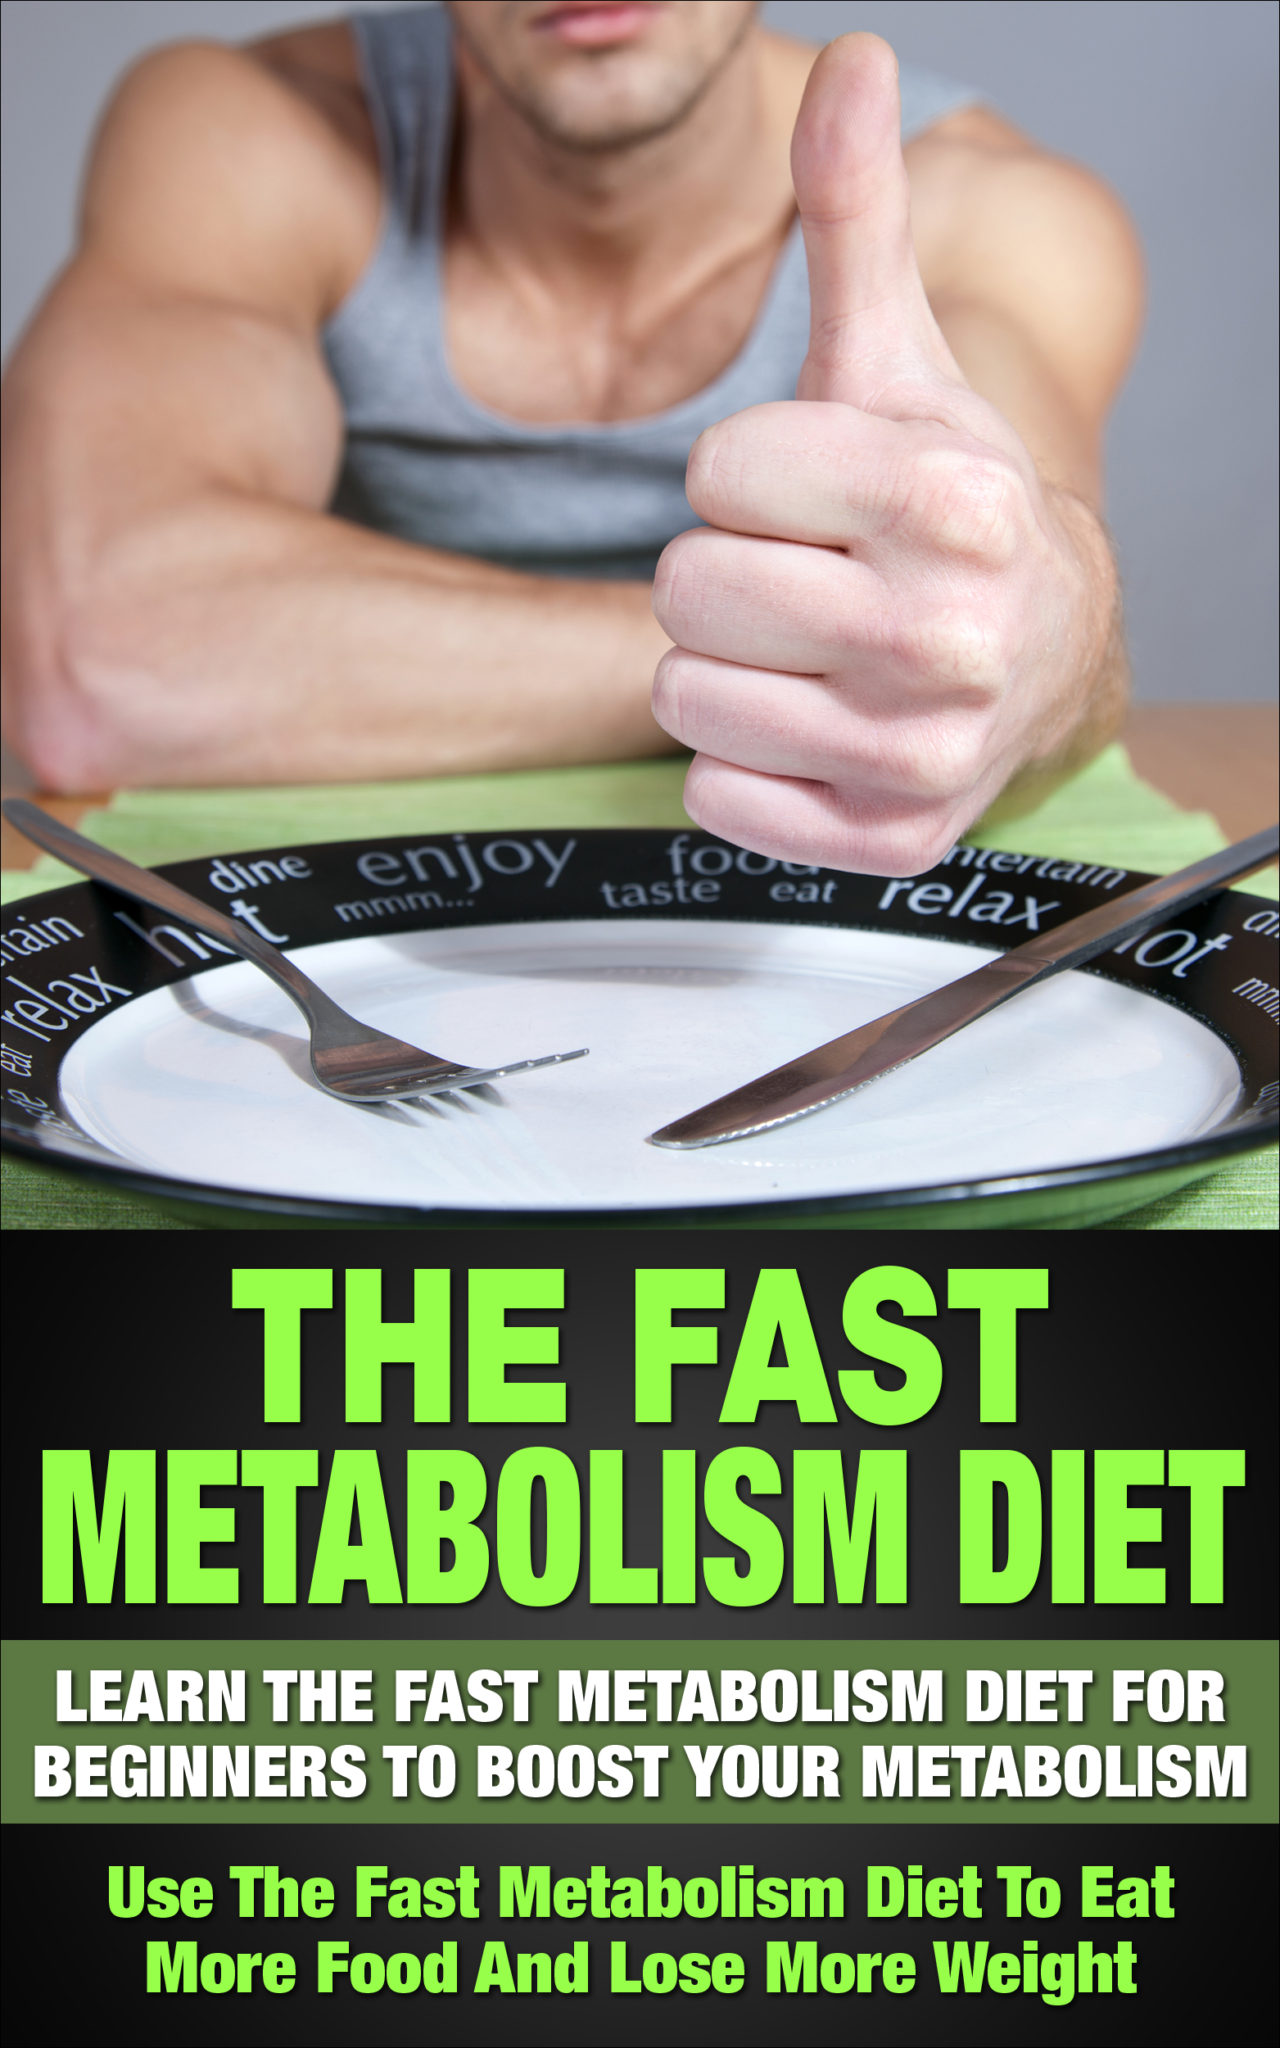 FREE: The Fast Metabolism Diet – Learn The Fast Metabolism Diet For Beginners To Boost Your Metabolism: Use The Fast Metabolism Diet To Eat More Food And Lose More Weight by Kris Greene